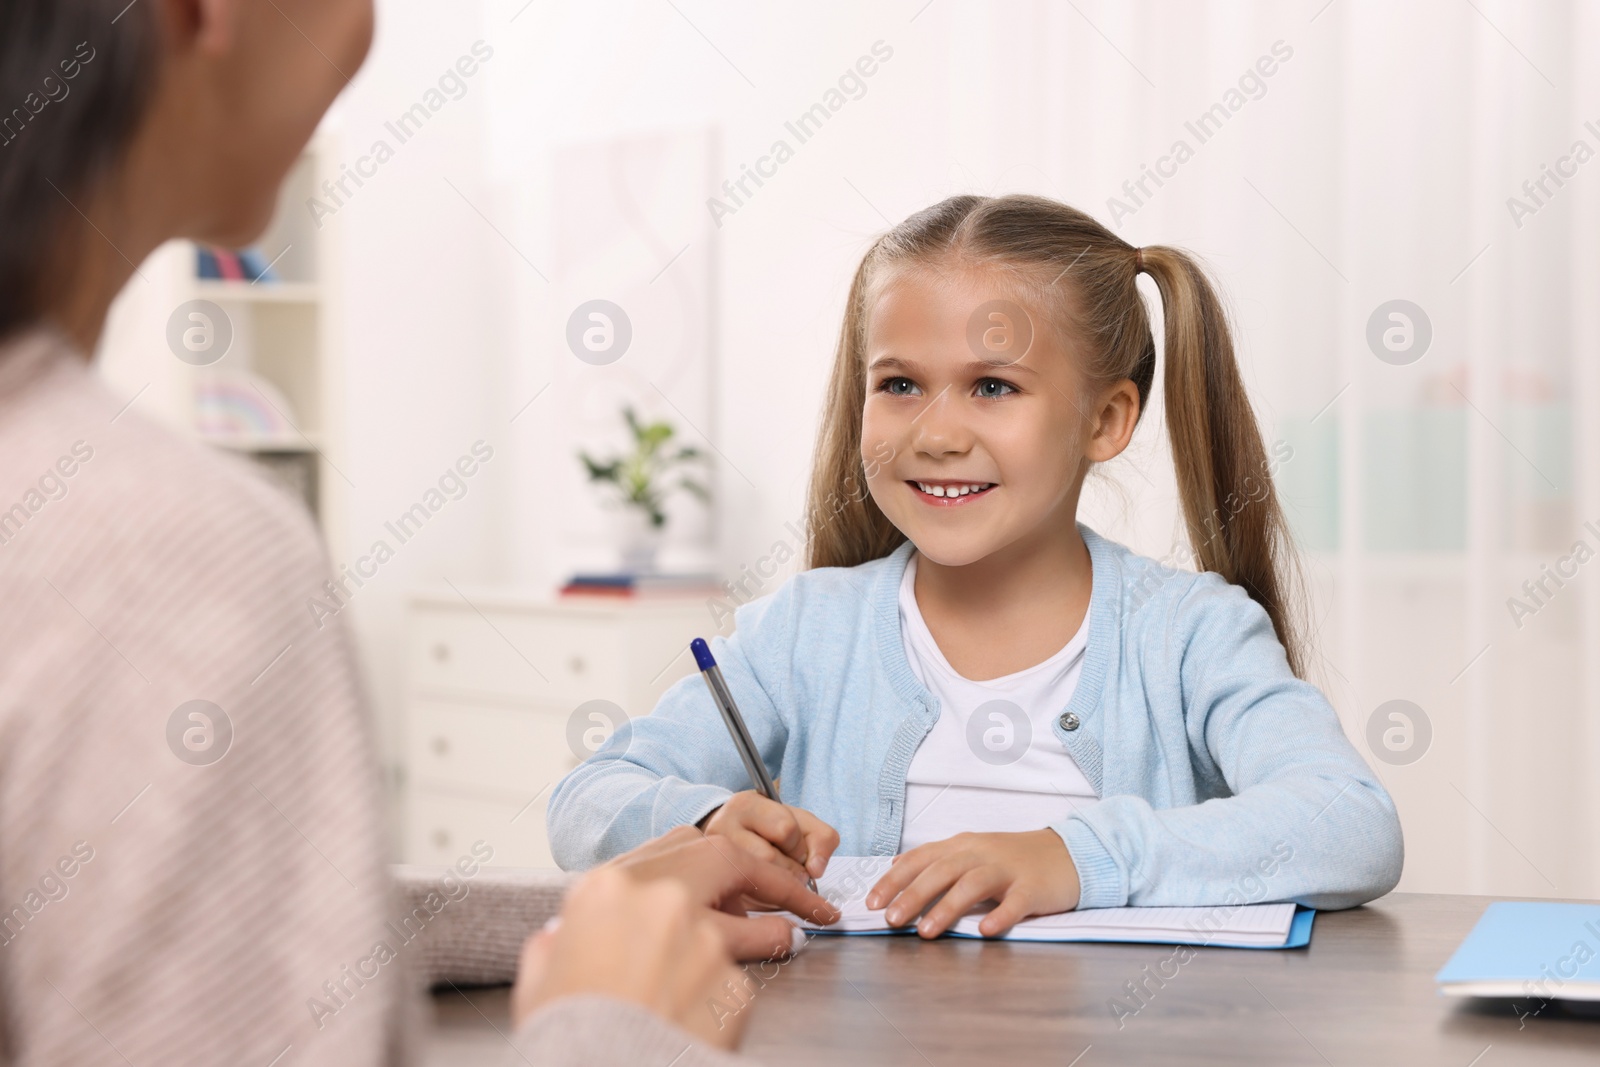 Photo of Dyslexia treatment. Therapist working with girl at table in room